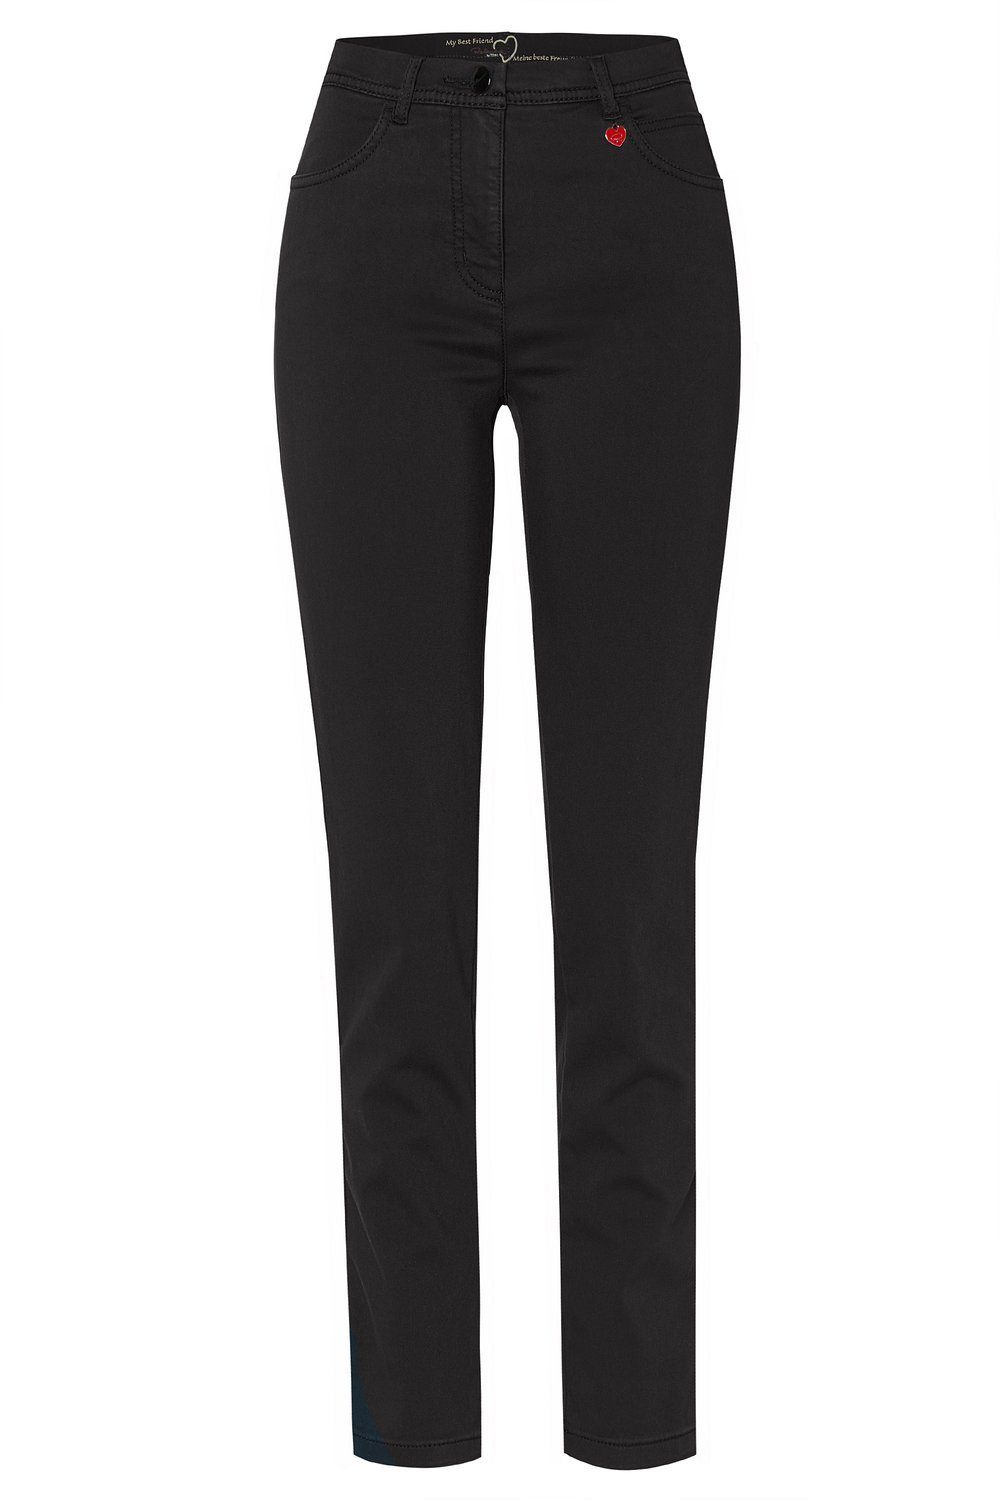 TONI Relaxed 5-Pocket-Hose by